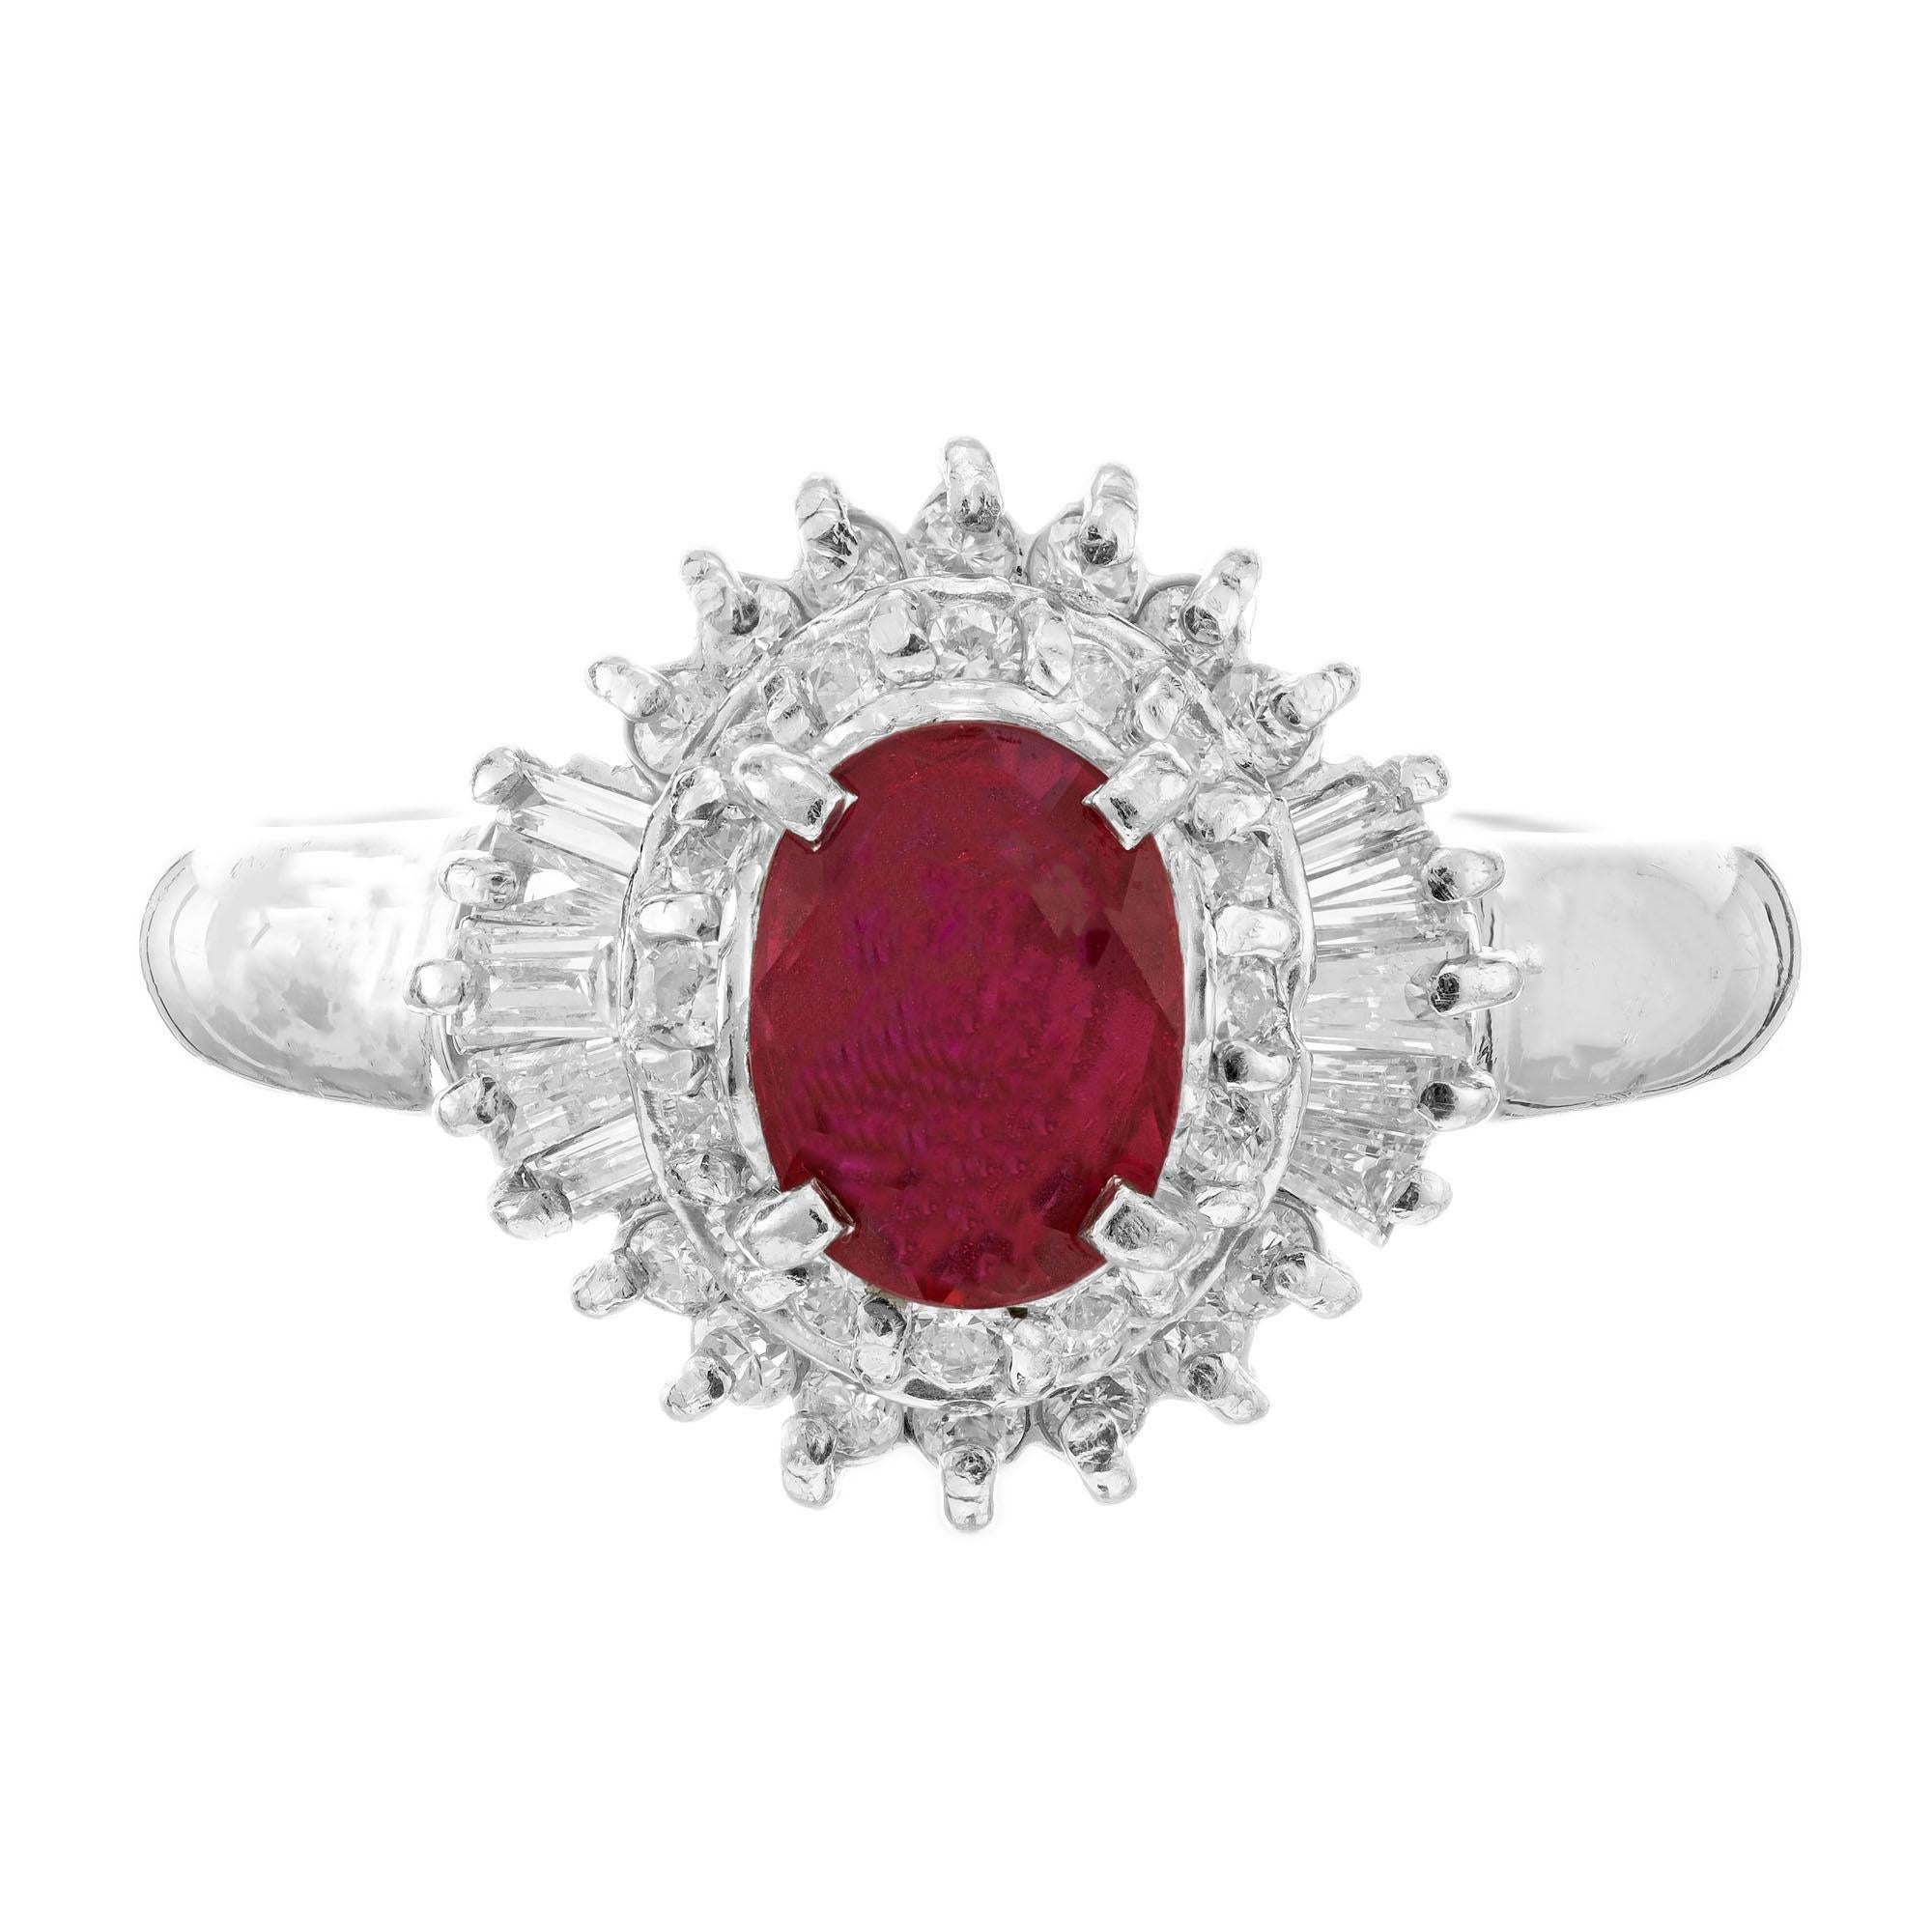 Oval ruby and diamond halo engagement ring. GIA certified .67 carat natural corundum oval center ruby with a halo of baguette and around diamonds in a custom-made platinum setting. 

1 oval red ruby, SI approx. .67cts GIA Certificate #6217312015
10